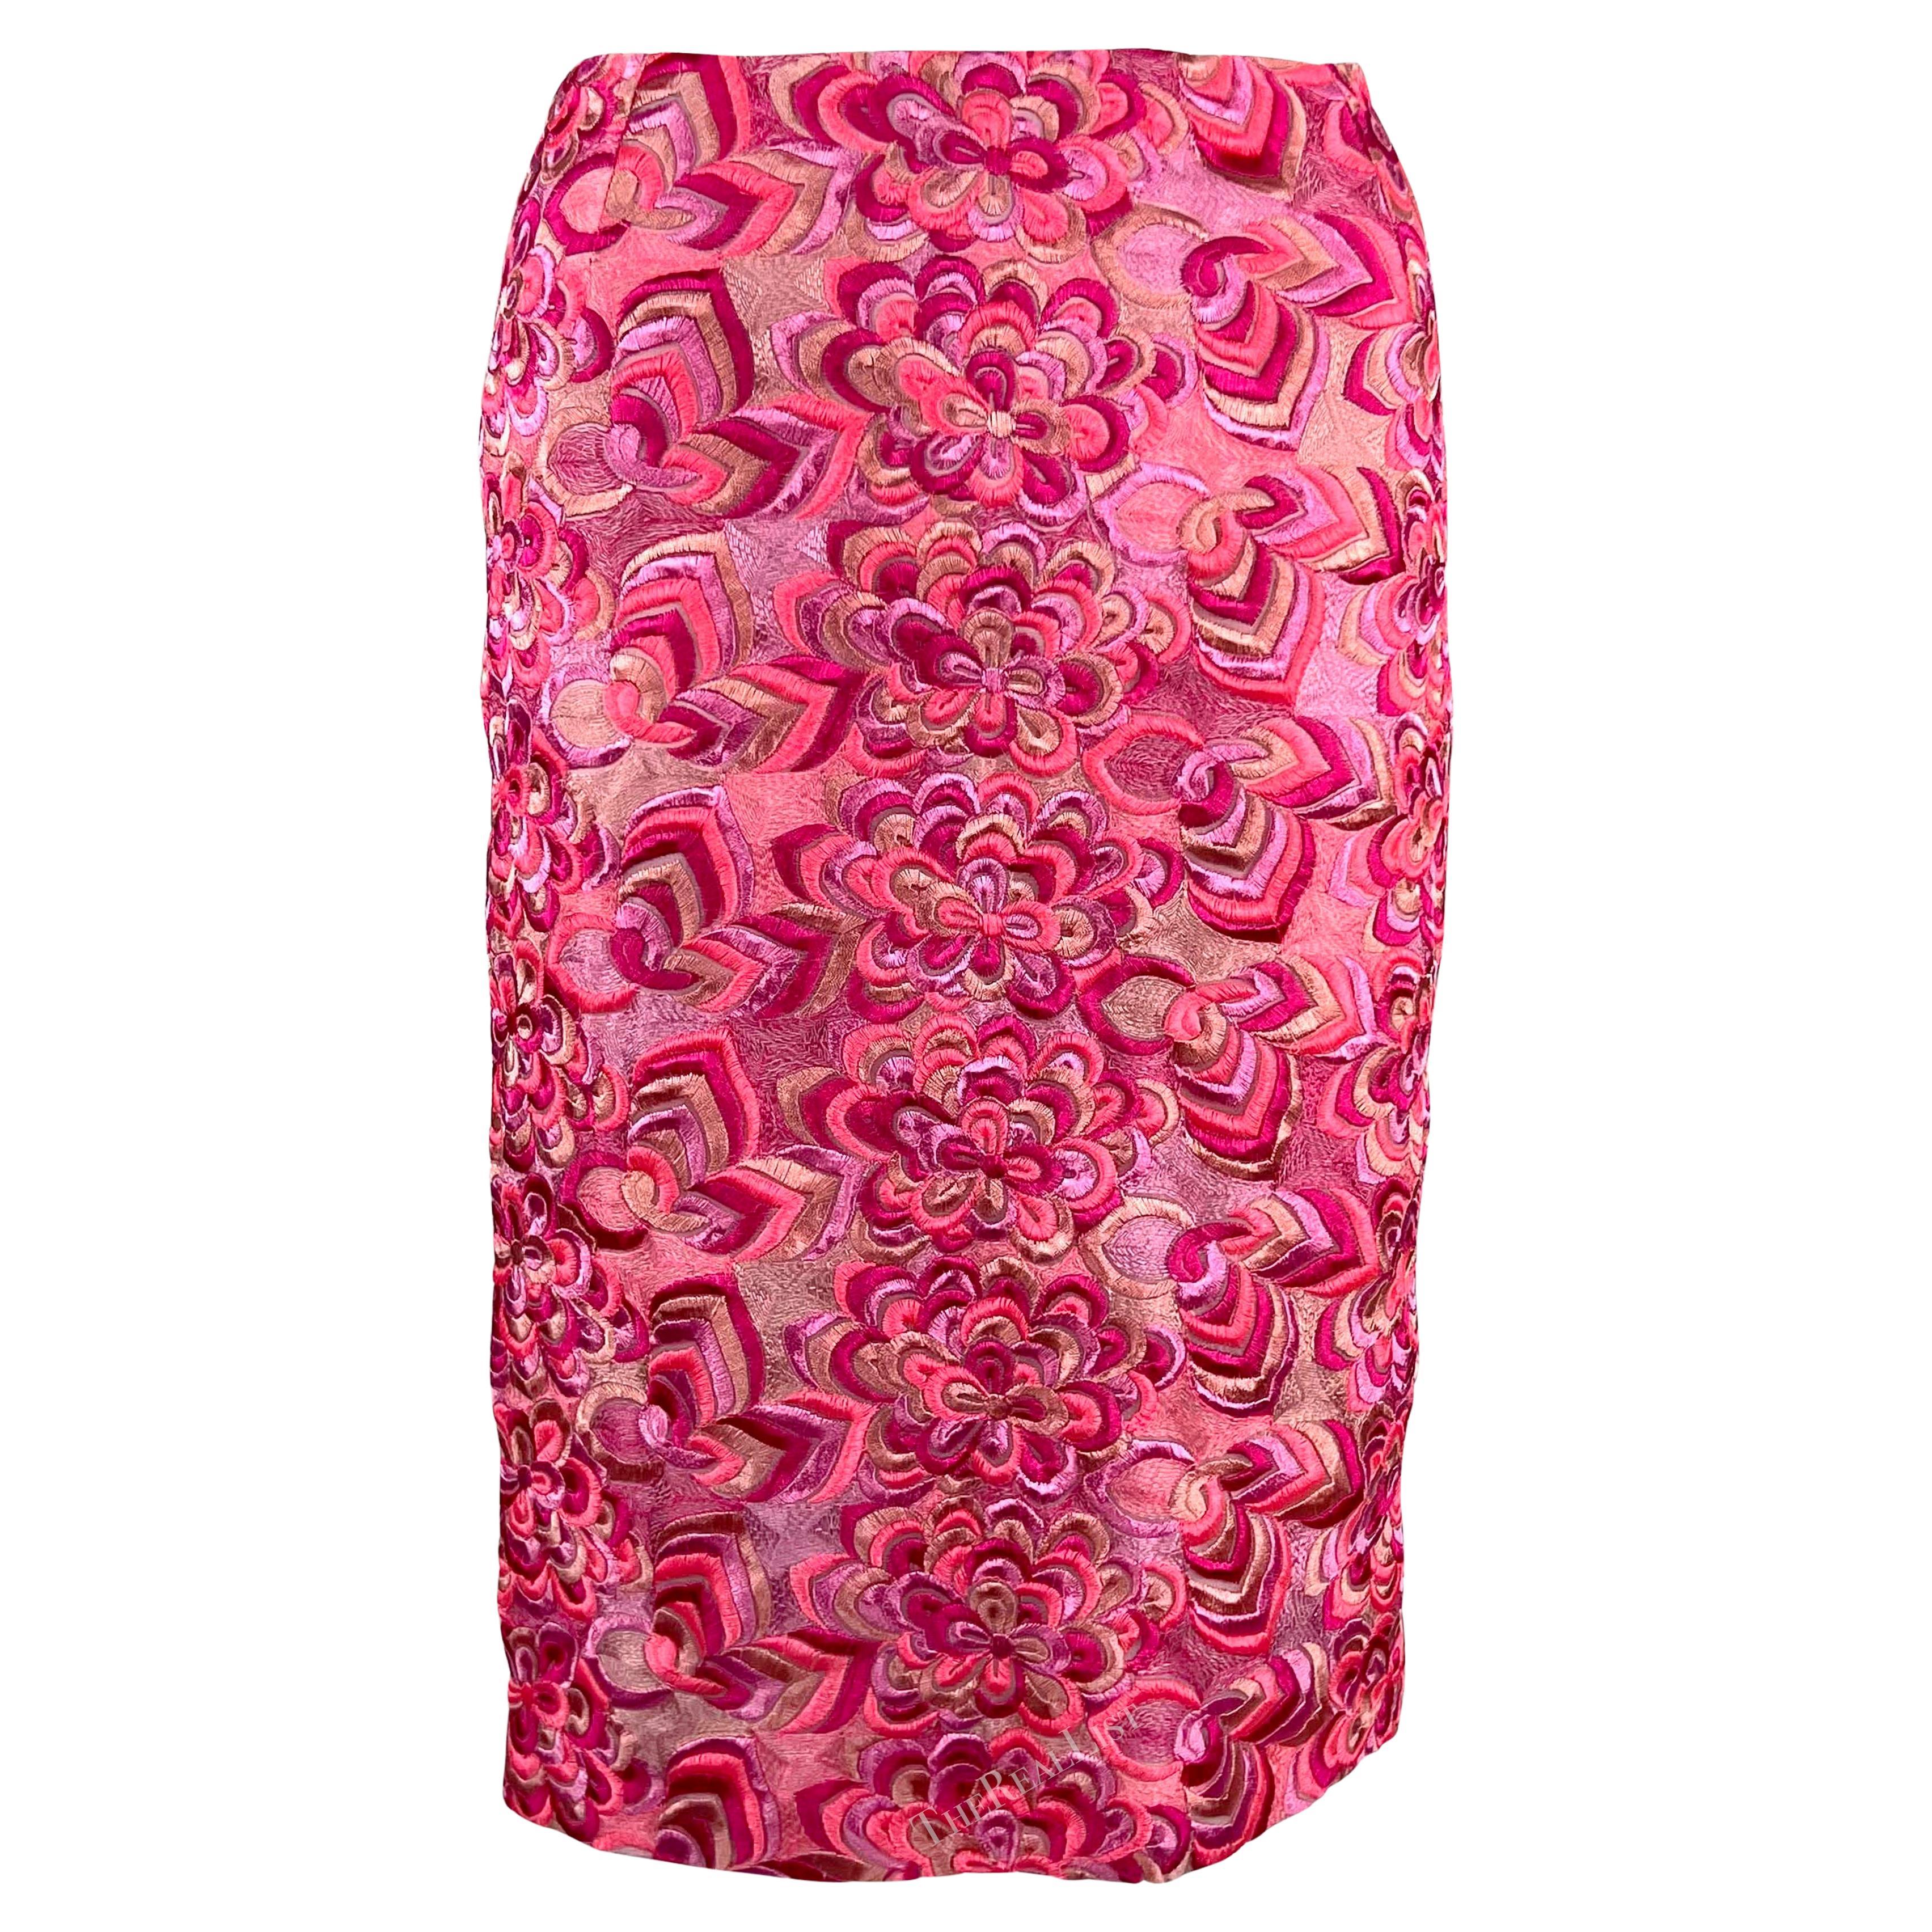 S/S 2000 Gianni Versace by Donatella Versace for Gianni Versace for Gianni Versace for Gianni Versace for Gianni Versace by Donatella Neon Pink Floral Embroidered Skirt en vente